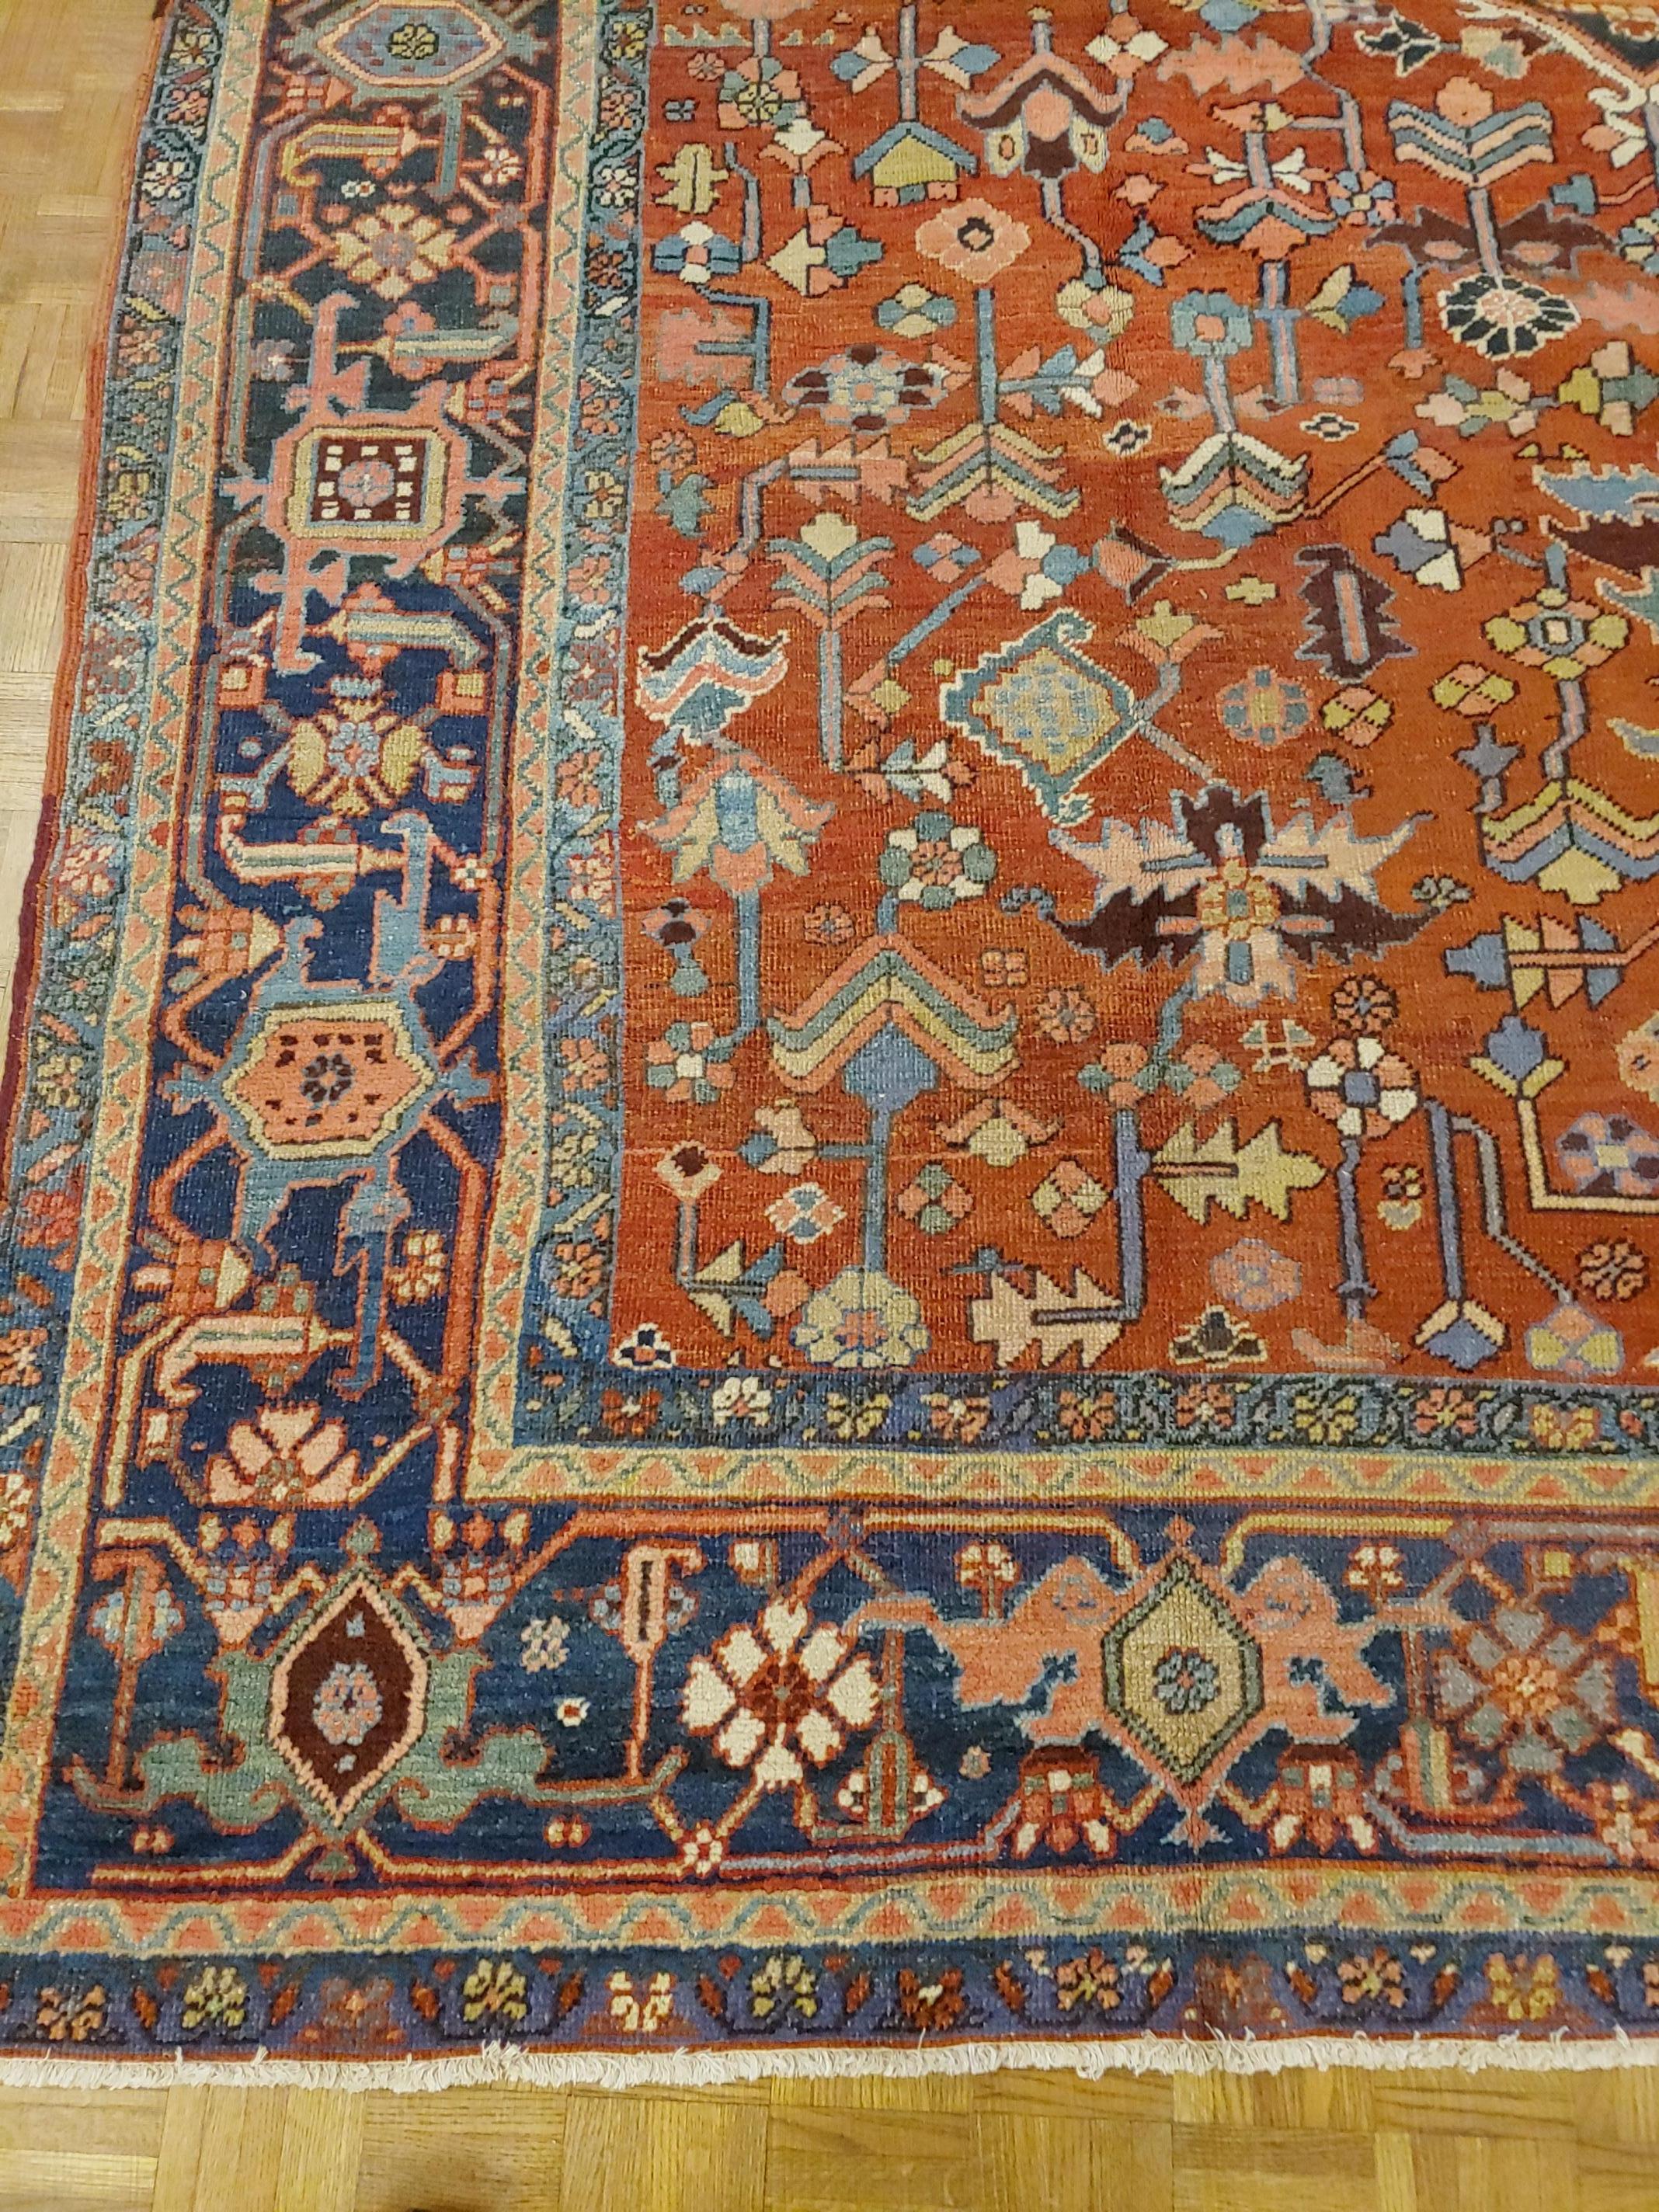 Great looking Persian antique Heriz which many dealers would call a Serapi. The rug has an impressive harmony of design and colors on a rust field with no medallion and a navy border with Classic geometric herati motif, circa 1915. Room size, size: